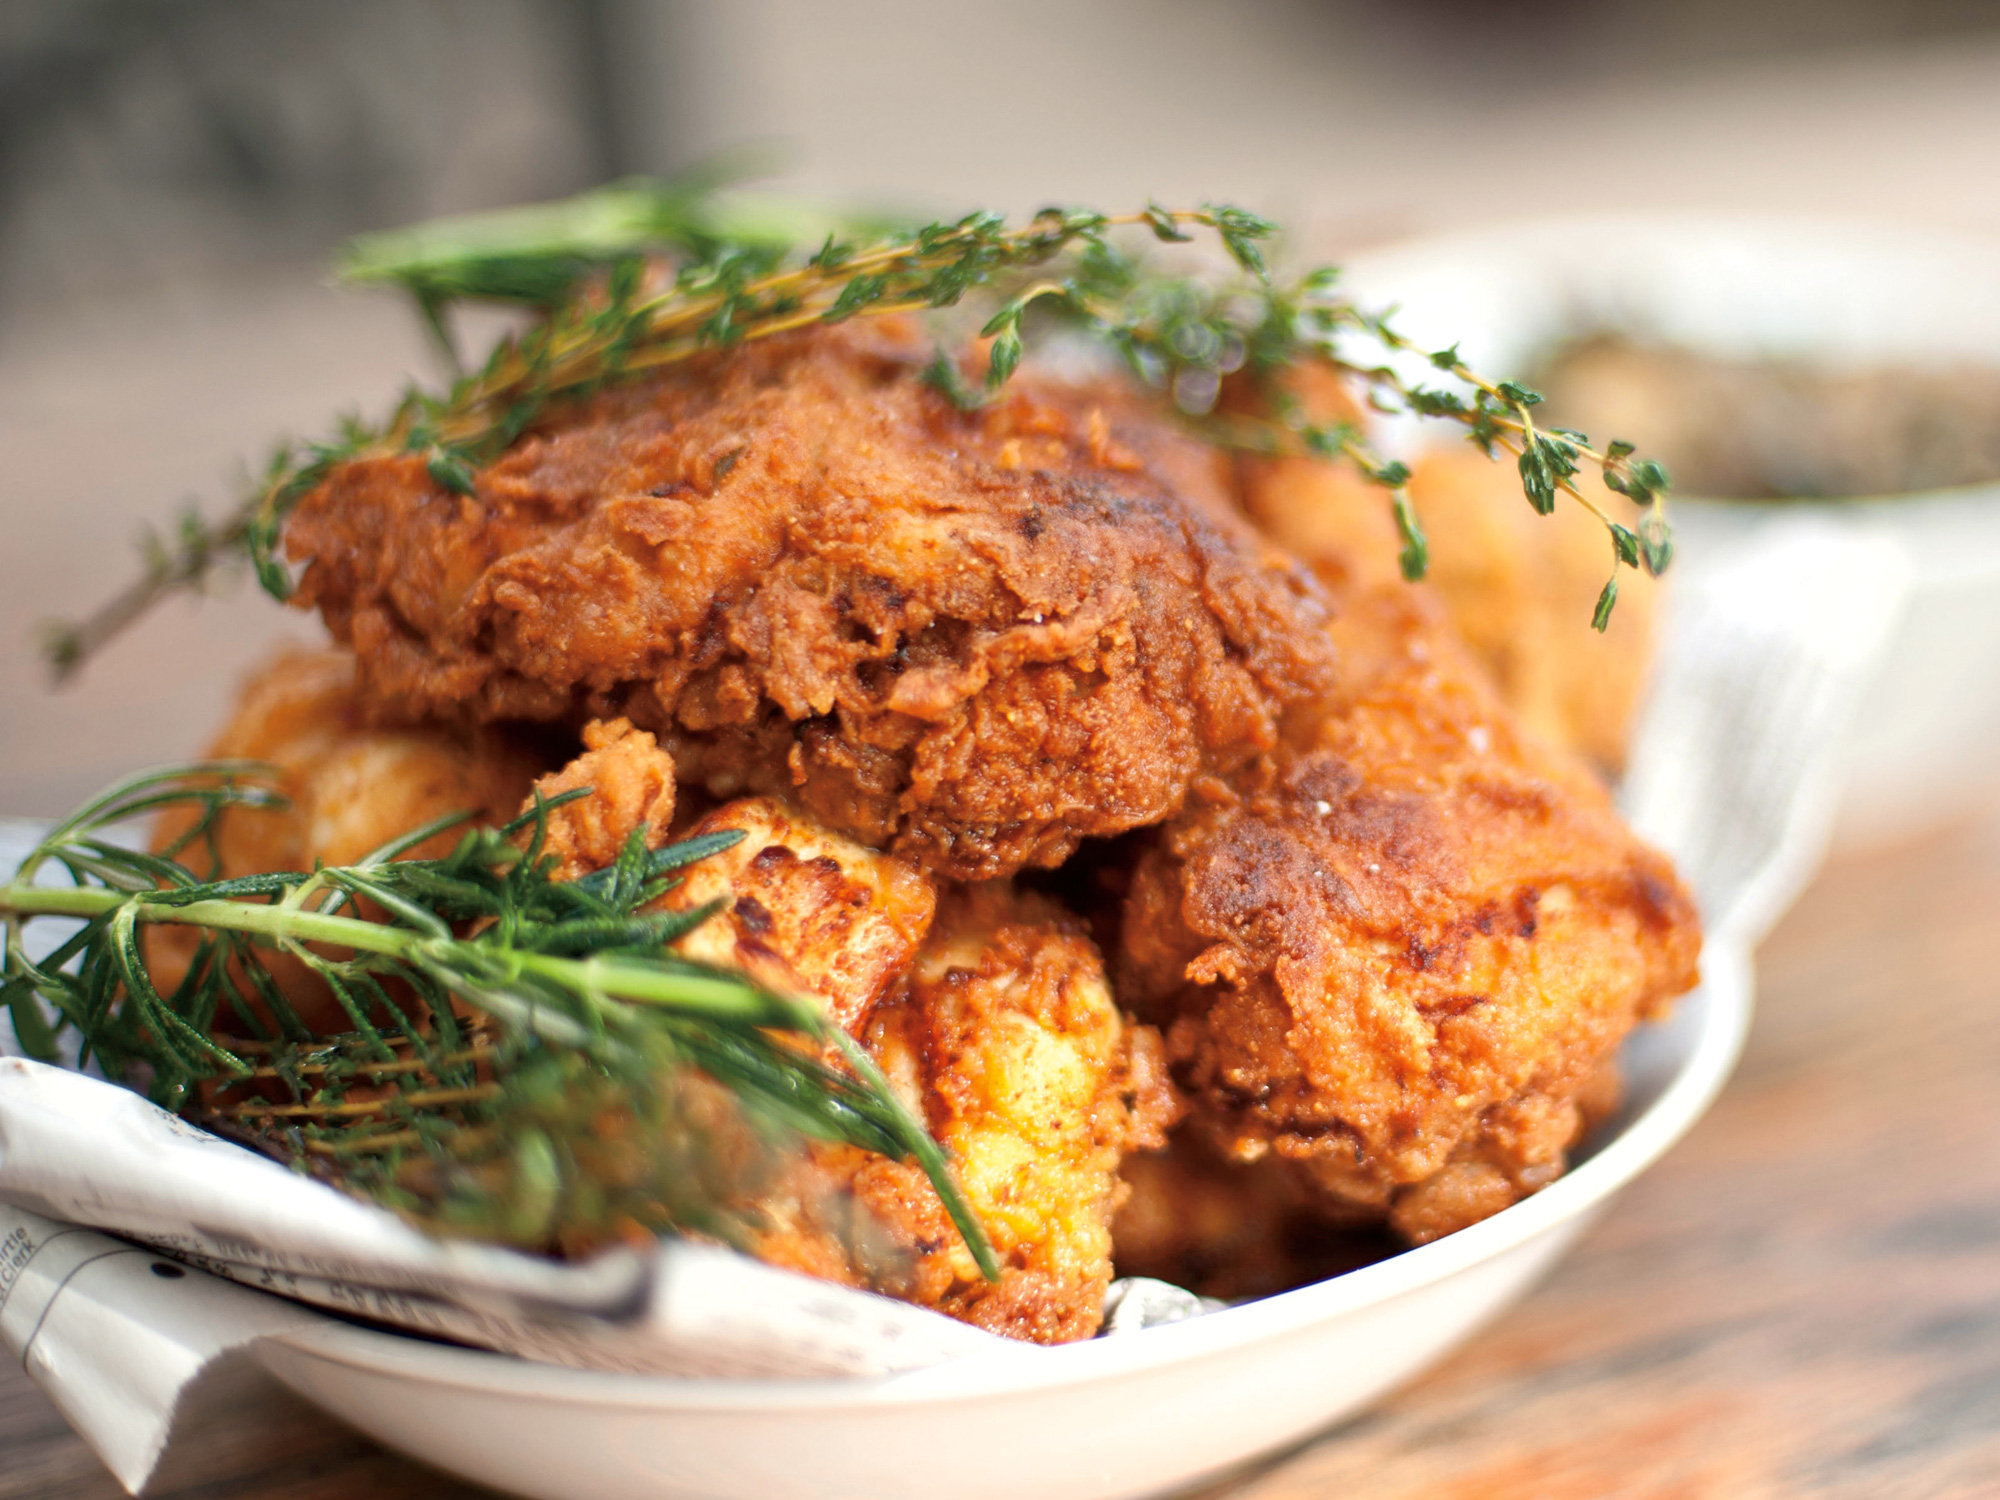 Buttermilk fried chicken is easy to make at home with these chef's secrets.